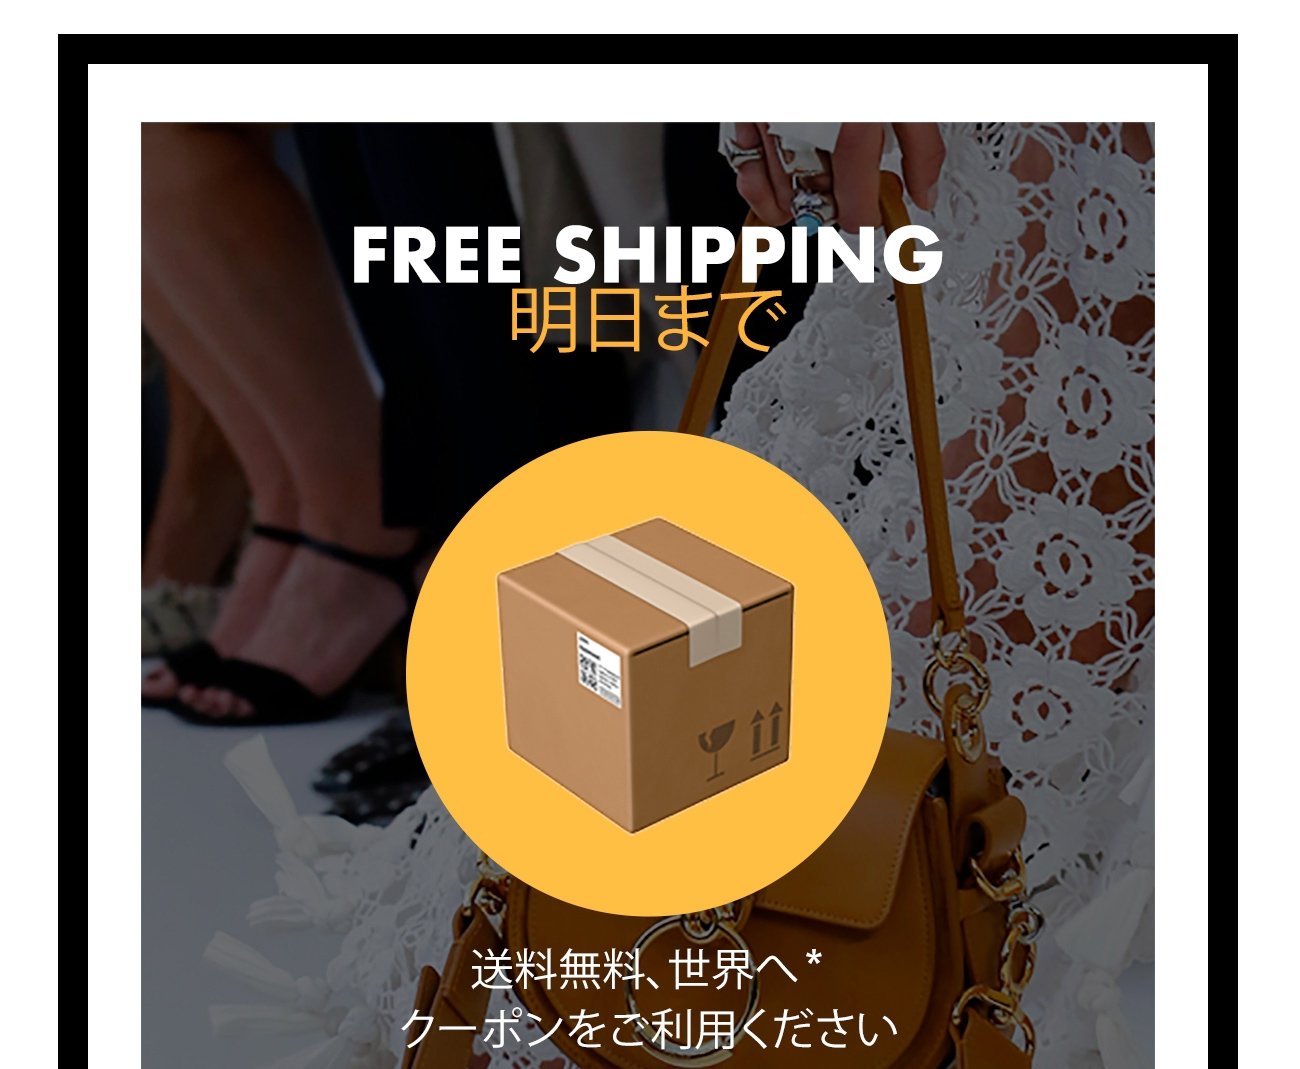 Enjoy Free Shipping With VIP Code